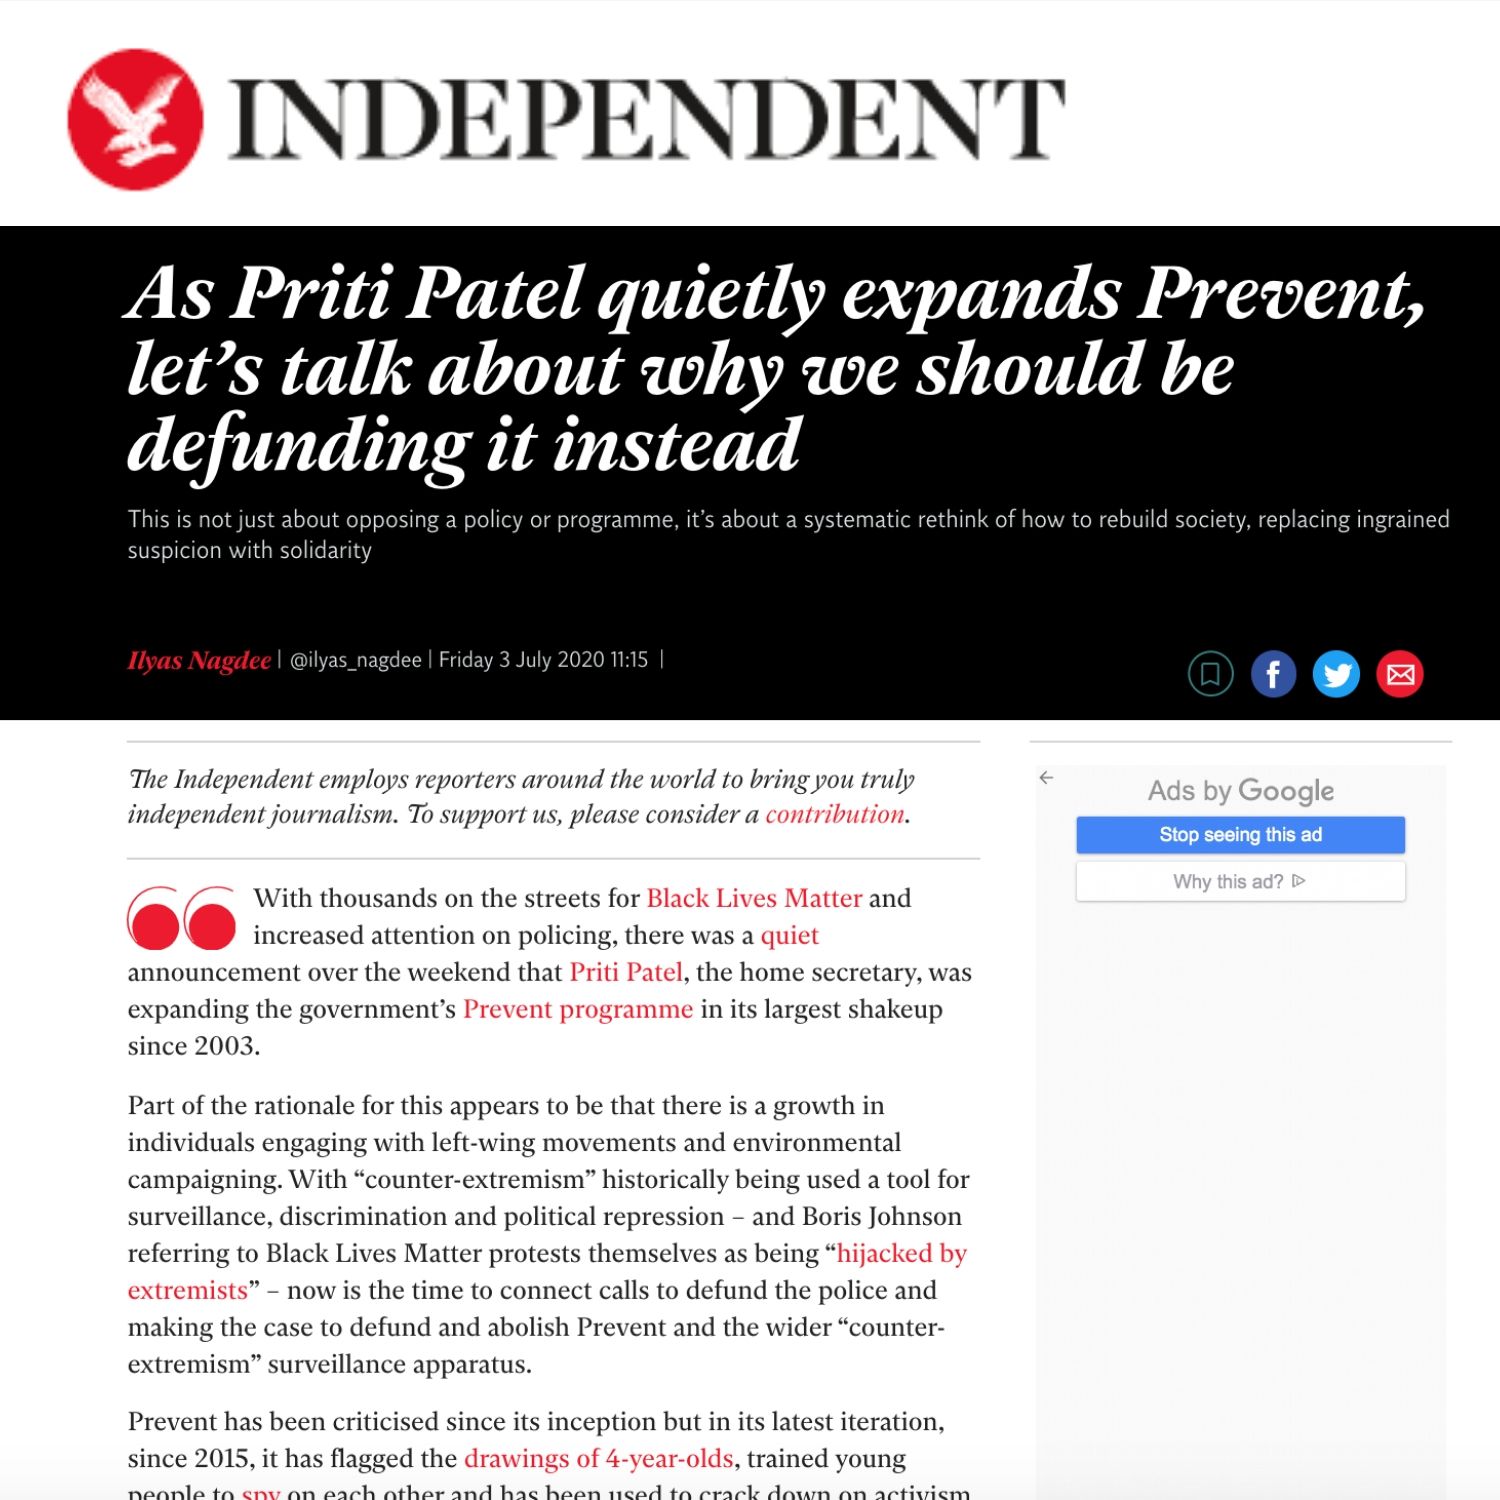 As Priti Patel quietly expands Prevent, let’s talk about why we should be defunding it instead